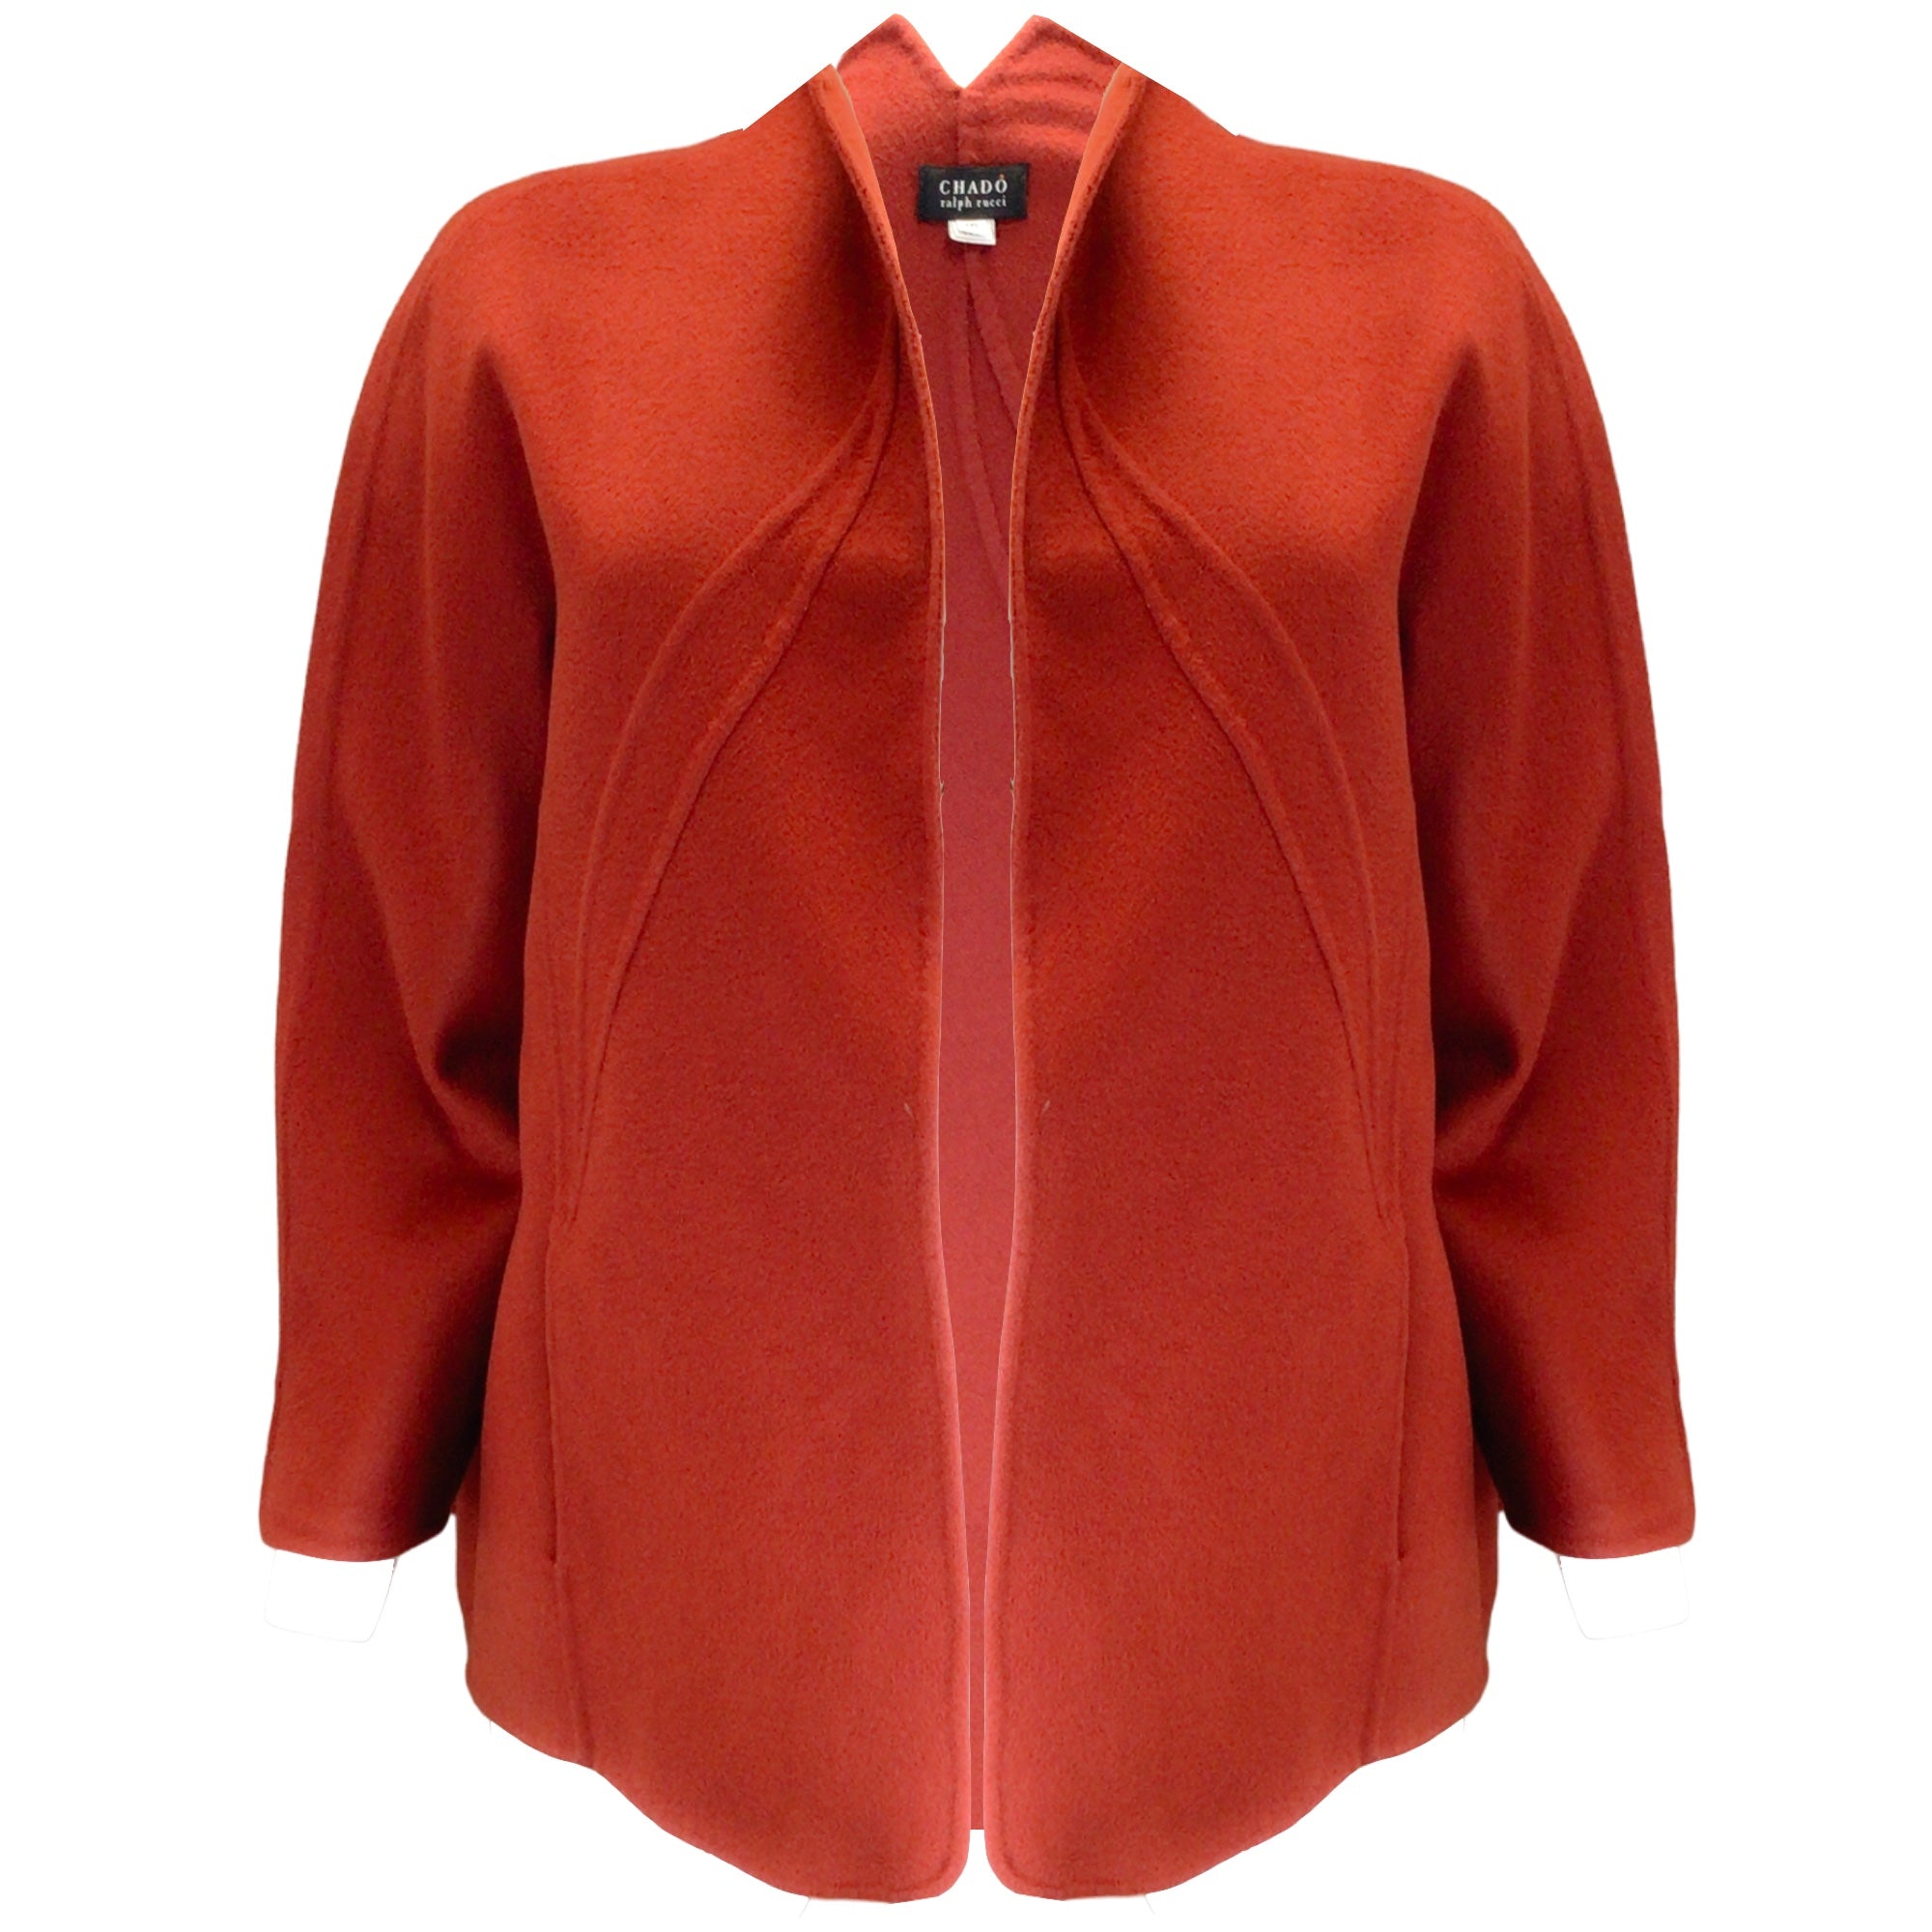 Chado by Ralph Rucci Rust Open Front Cashmere Jacket